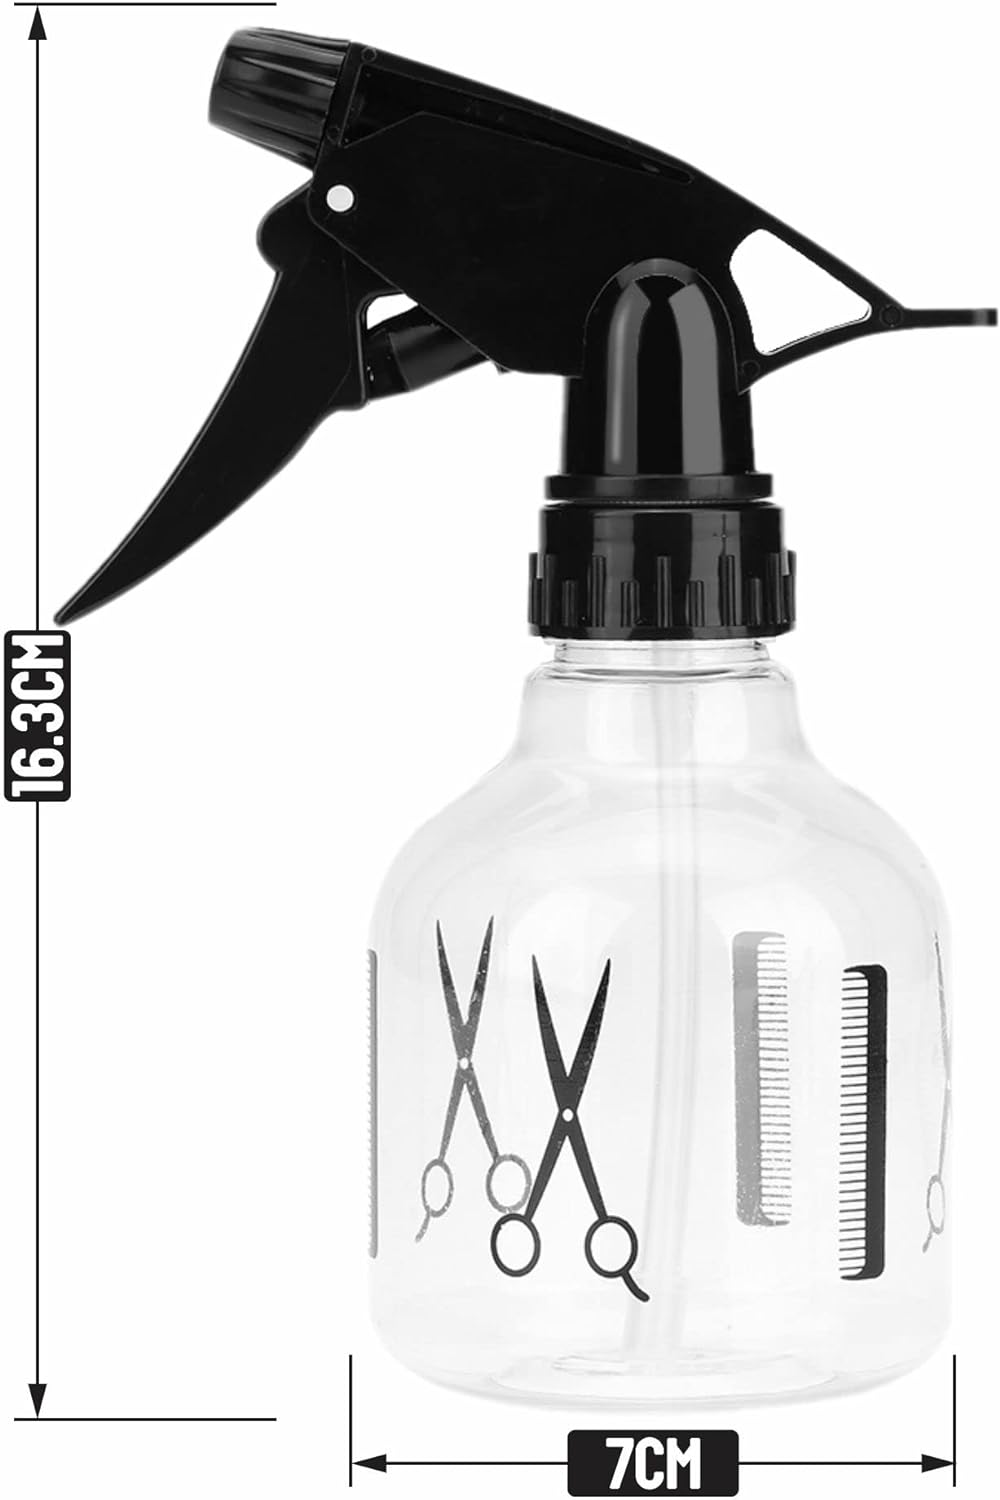 a spray bottle with scissors and a comb on it